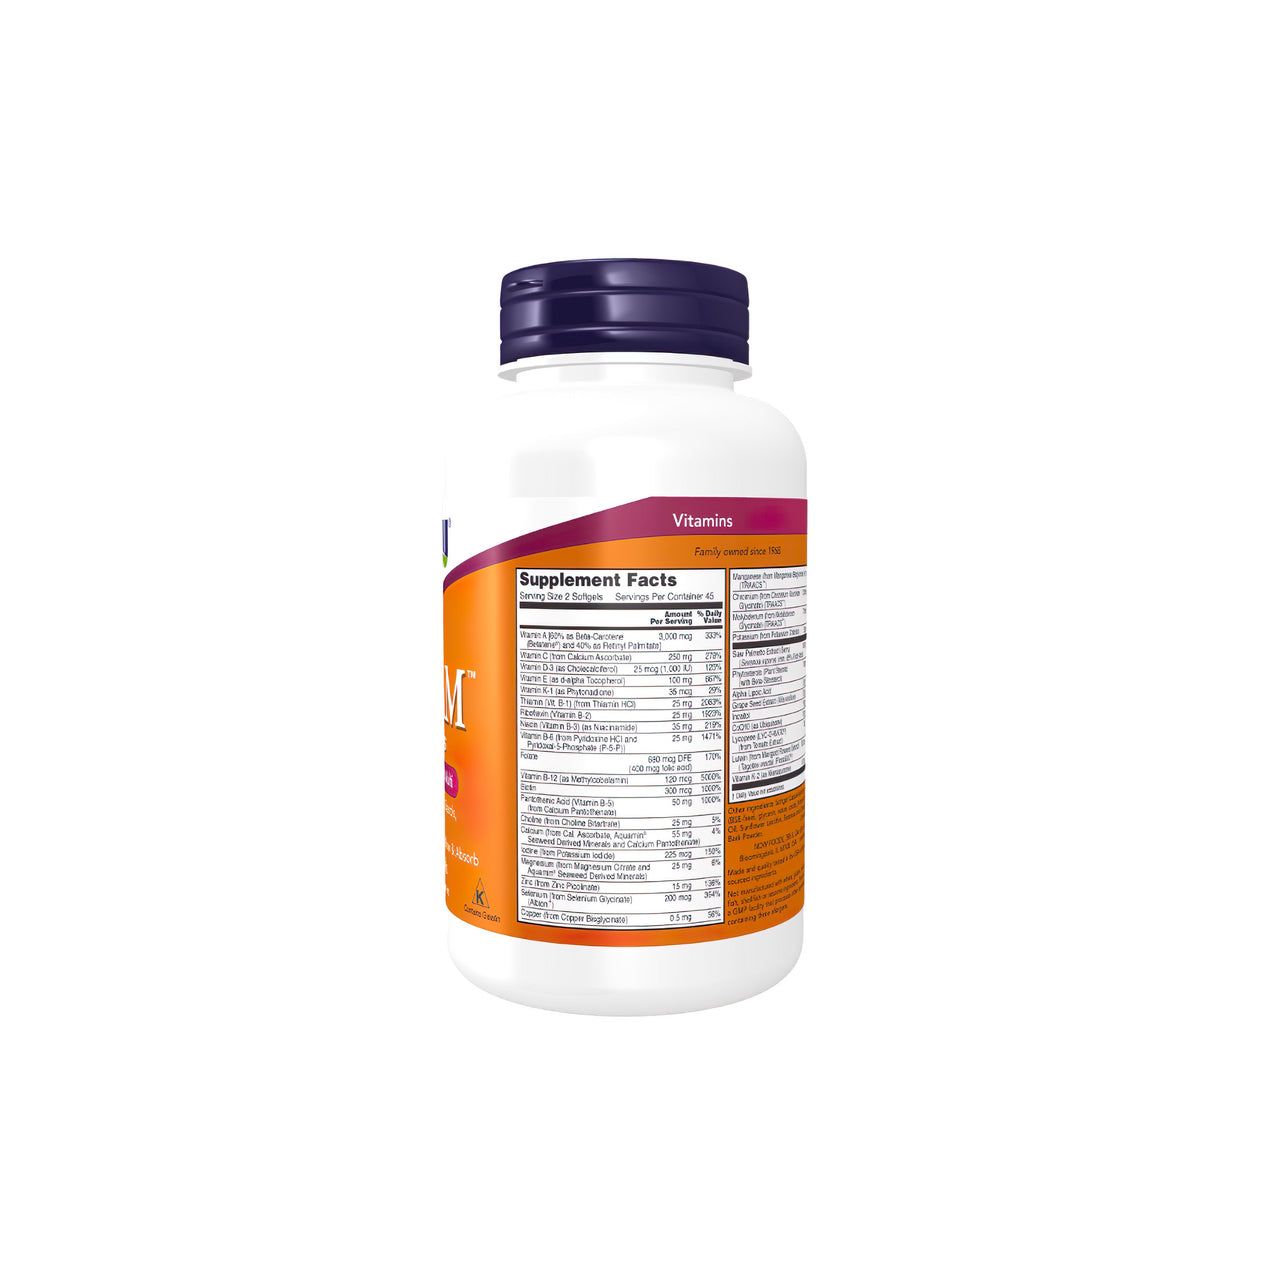 A bottle of ADAM Multivitamins & Minerals for Man 90 sgel by Now Foods on a white background.